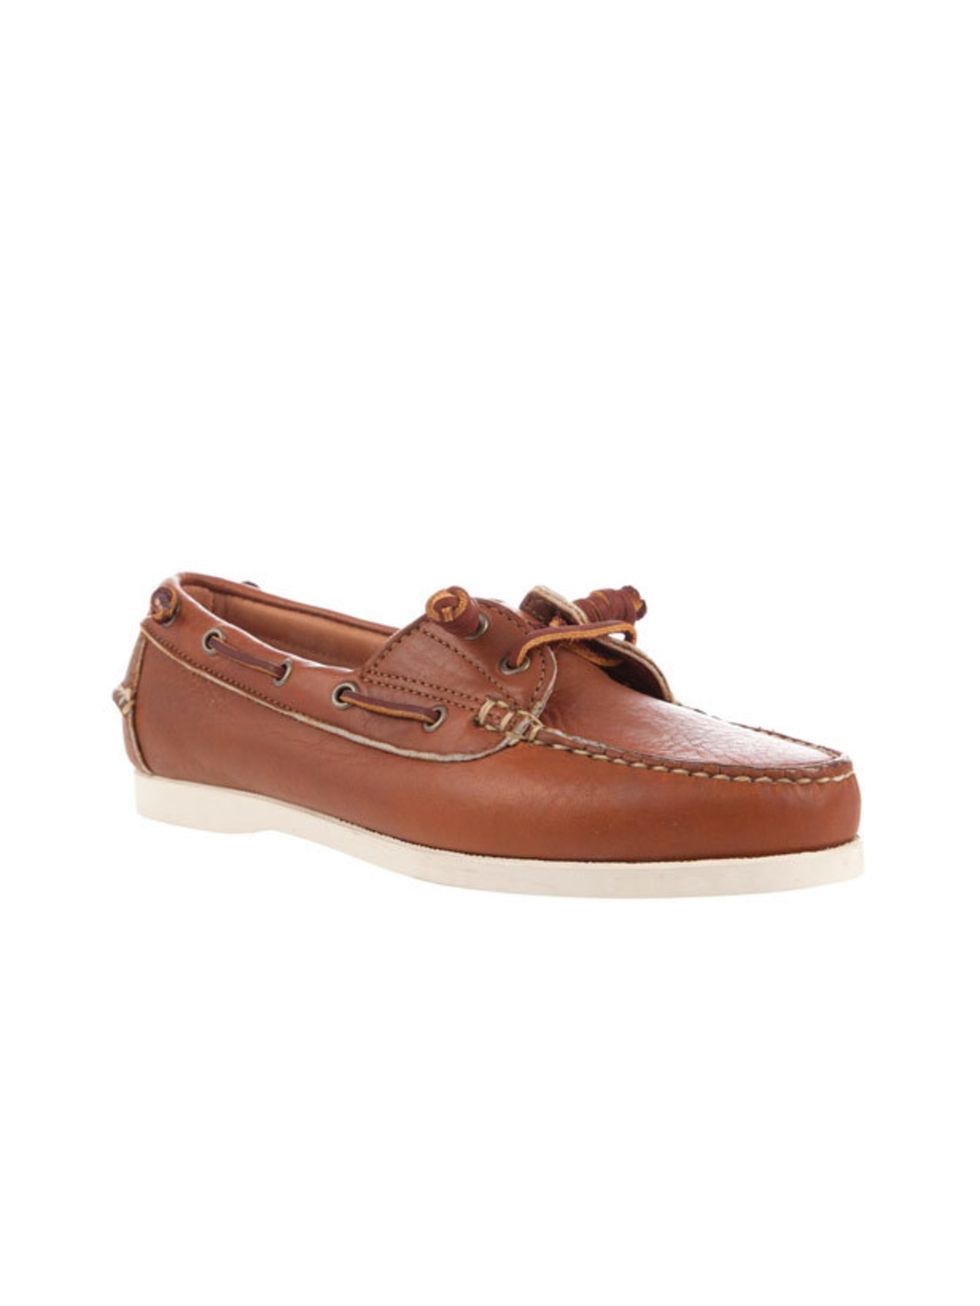 <p>Tan leather boat shoes, £232, by Ralph Lauren at Farfetch</p>